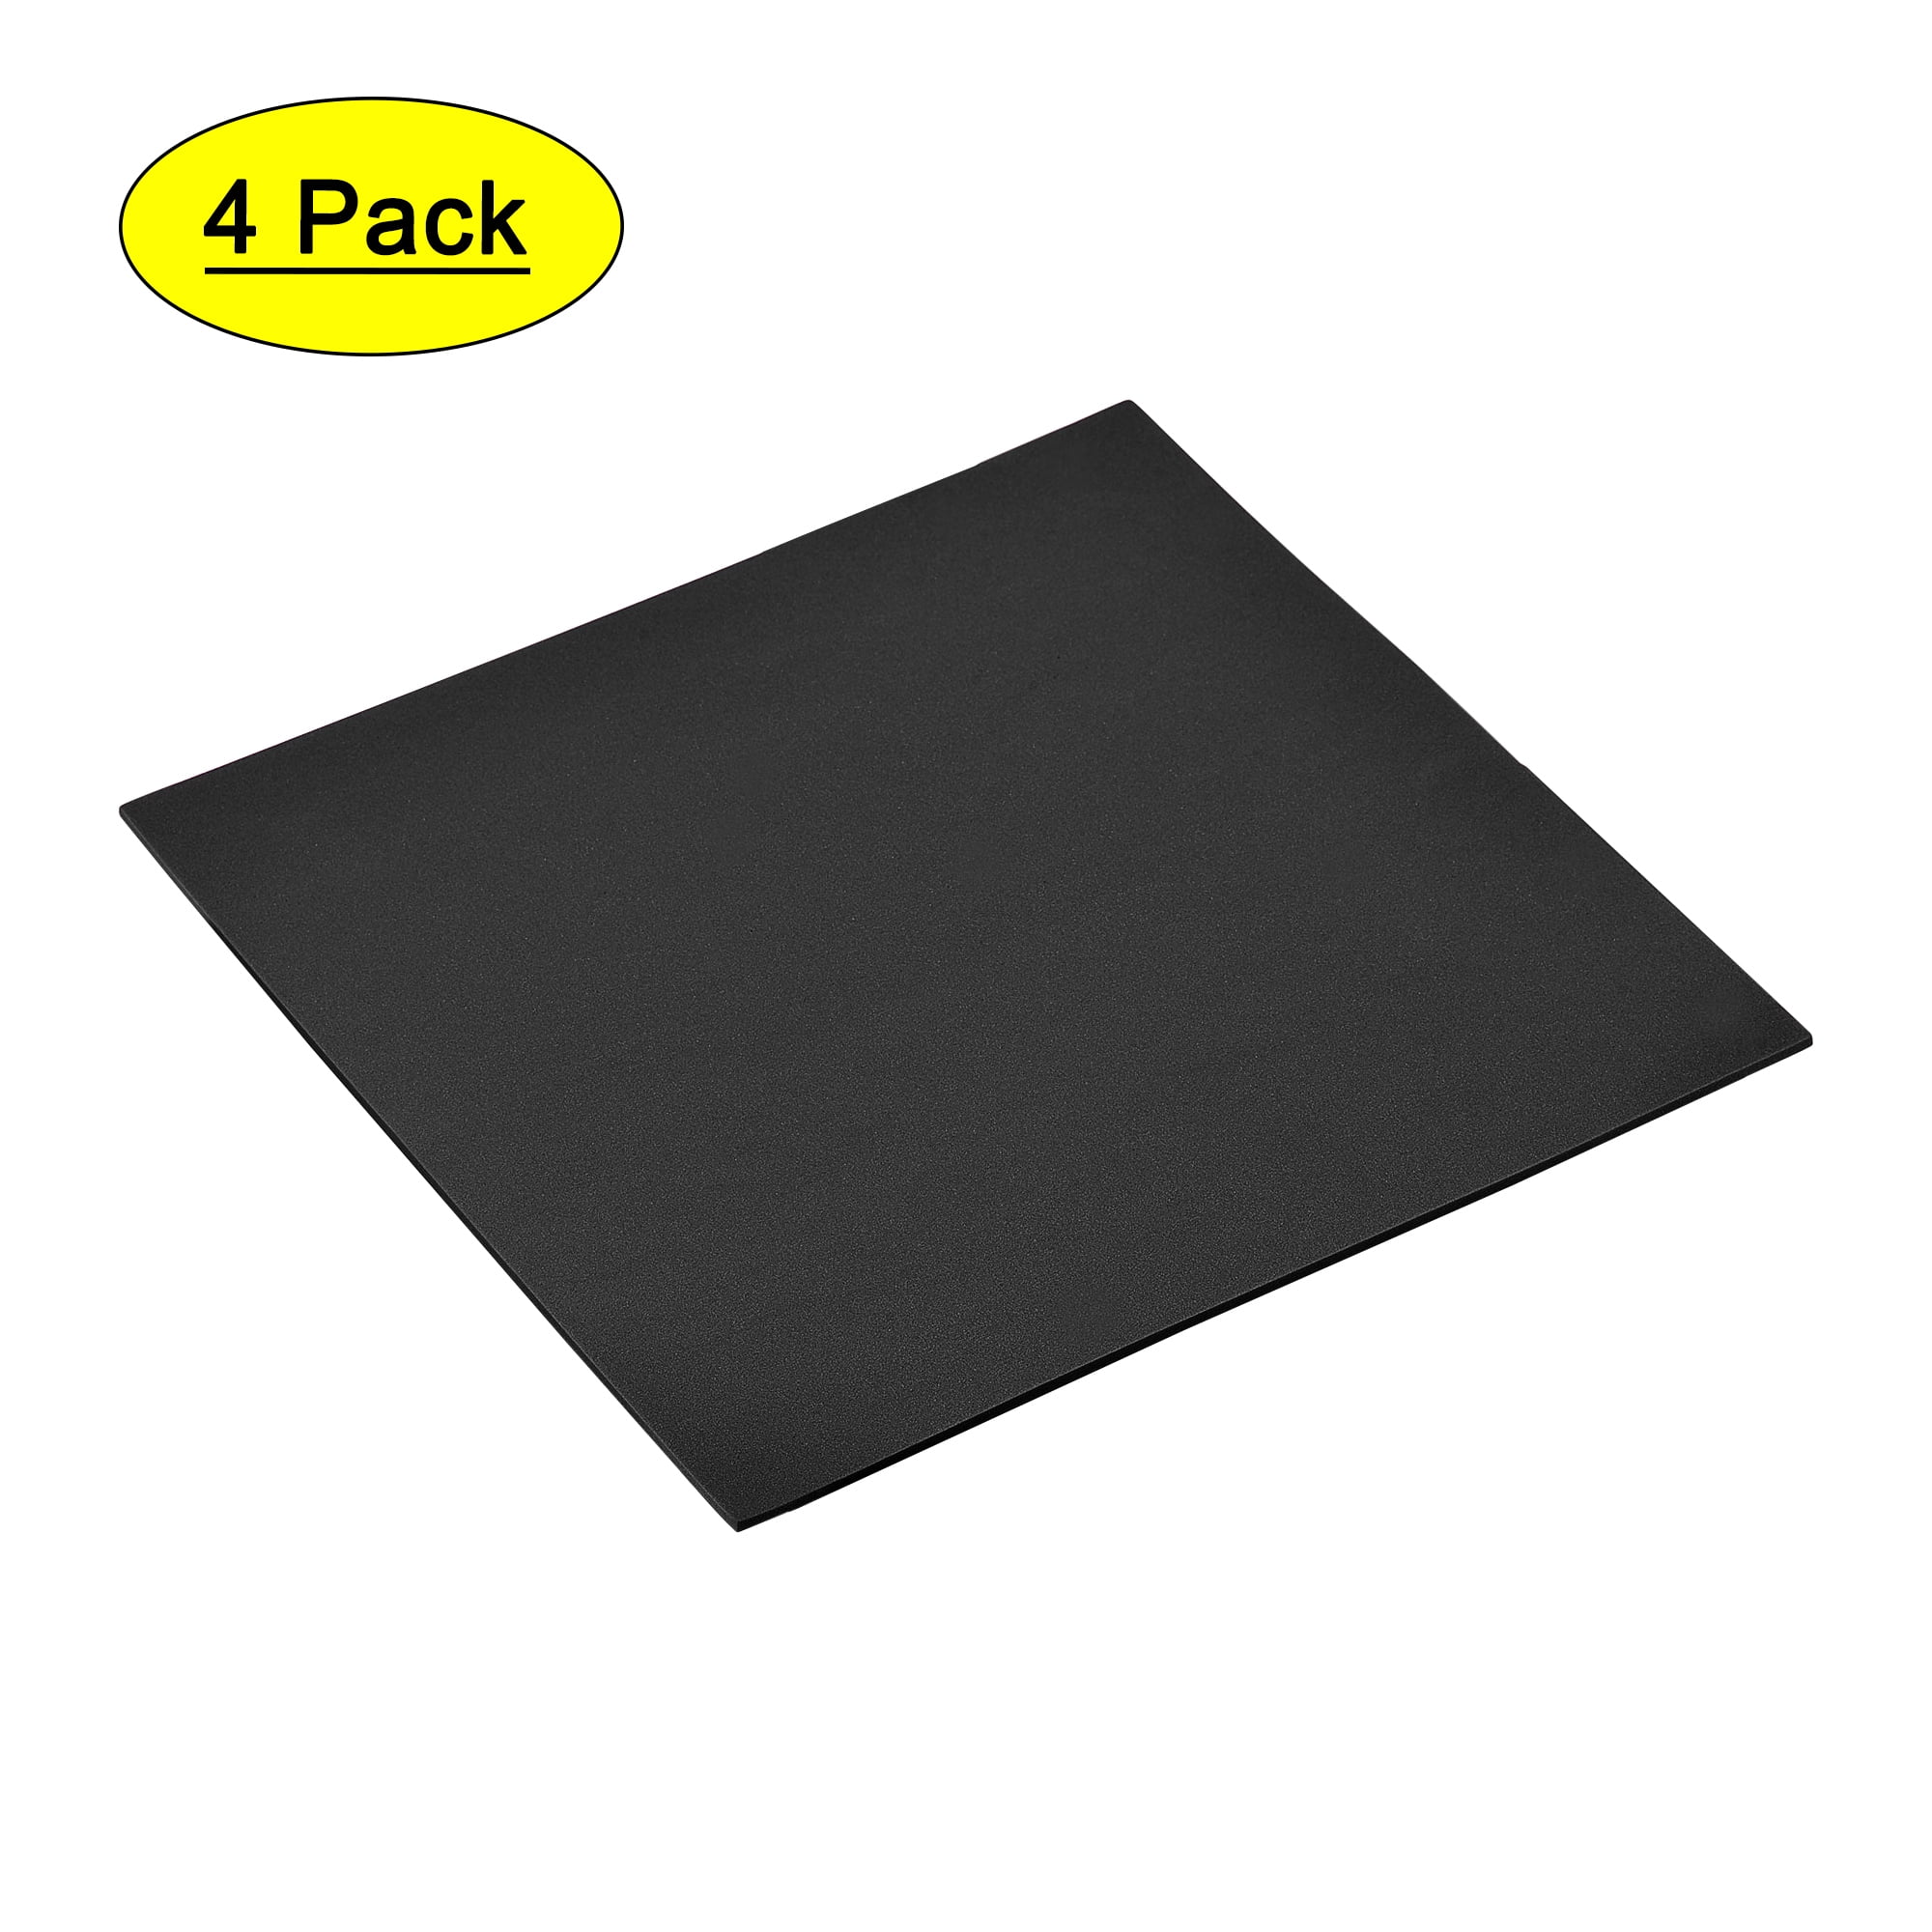 Uxcell Eva Foam Sheets Black Self Adhesive Back 6.56ft x 11.8 inch 2mm Thickness